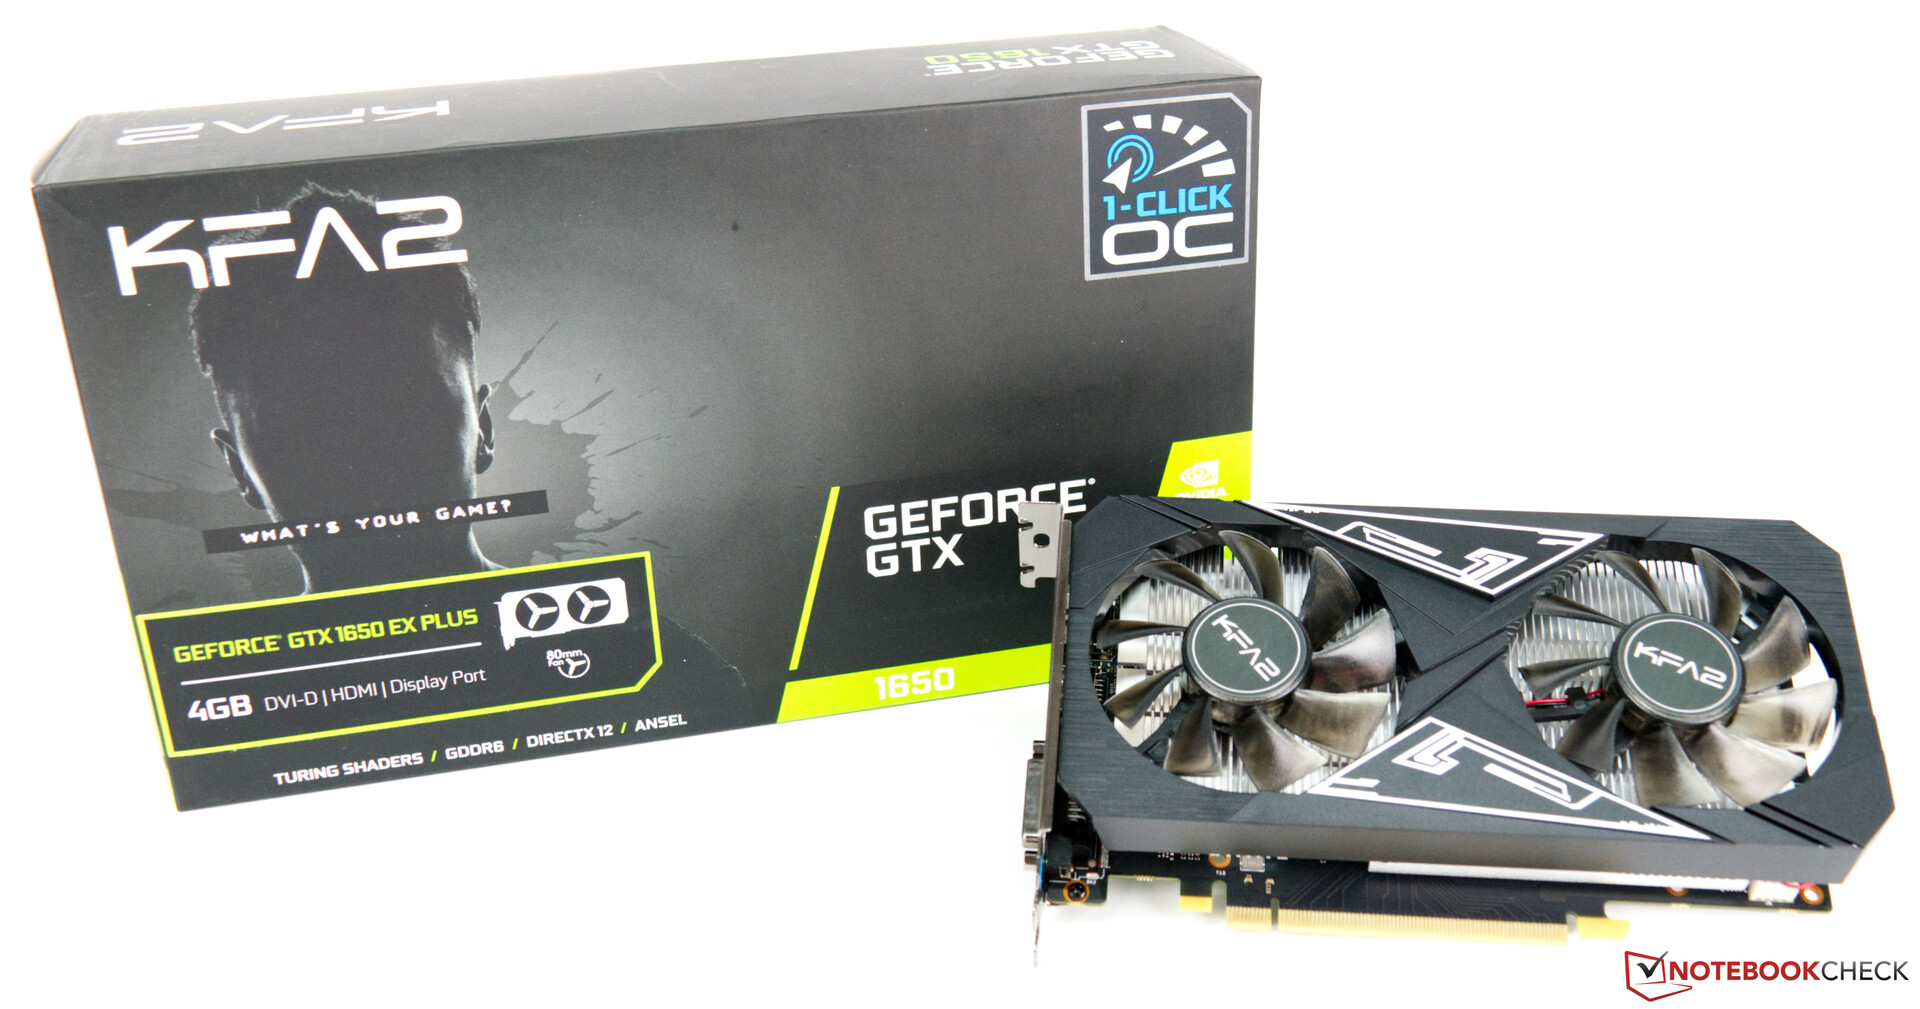 KFA2 GeForce GTX EX Plus Review performance and faster VRAM the smallest Turing-based desktop GPU - NotebookCheck.net Reviews